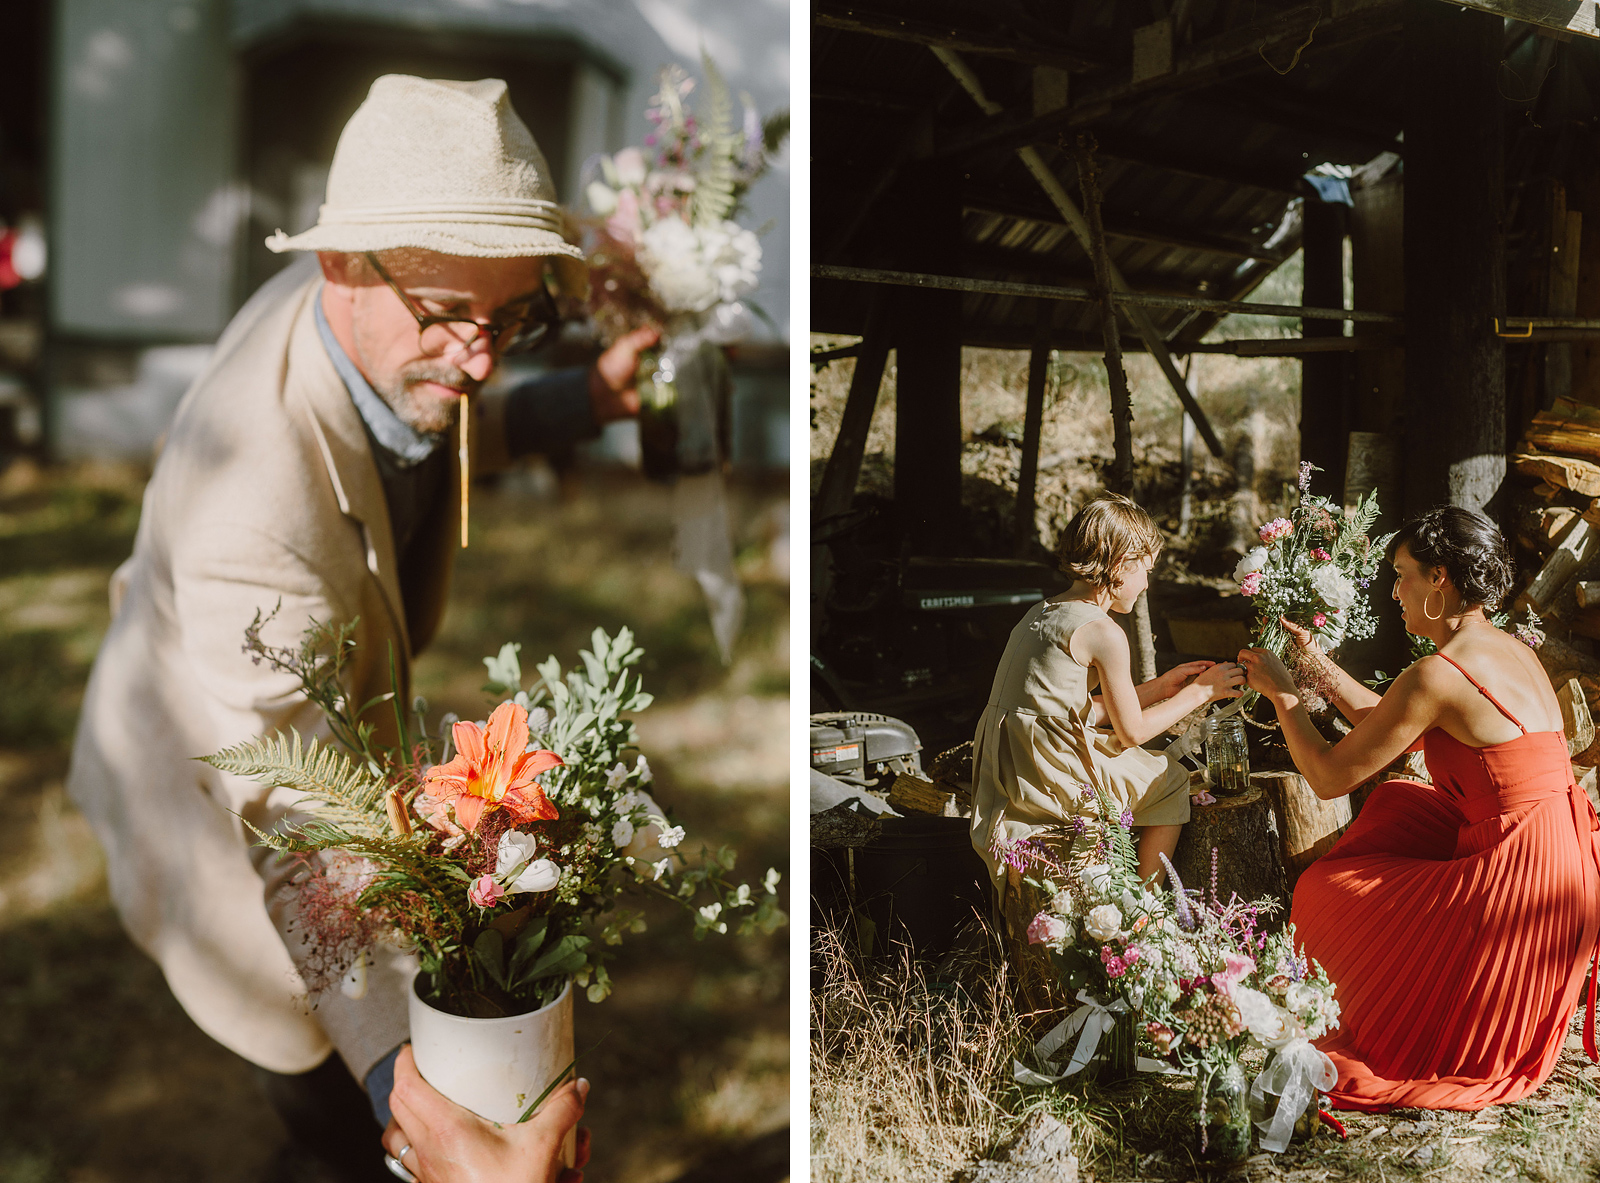 Guests preparing floral arrangements for table settings - Columbia River Gorge wedding in Mosier, OR